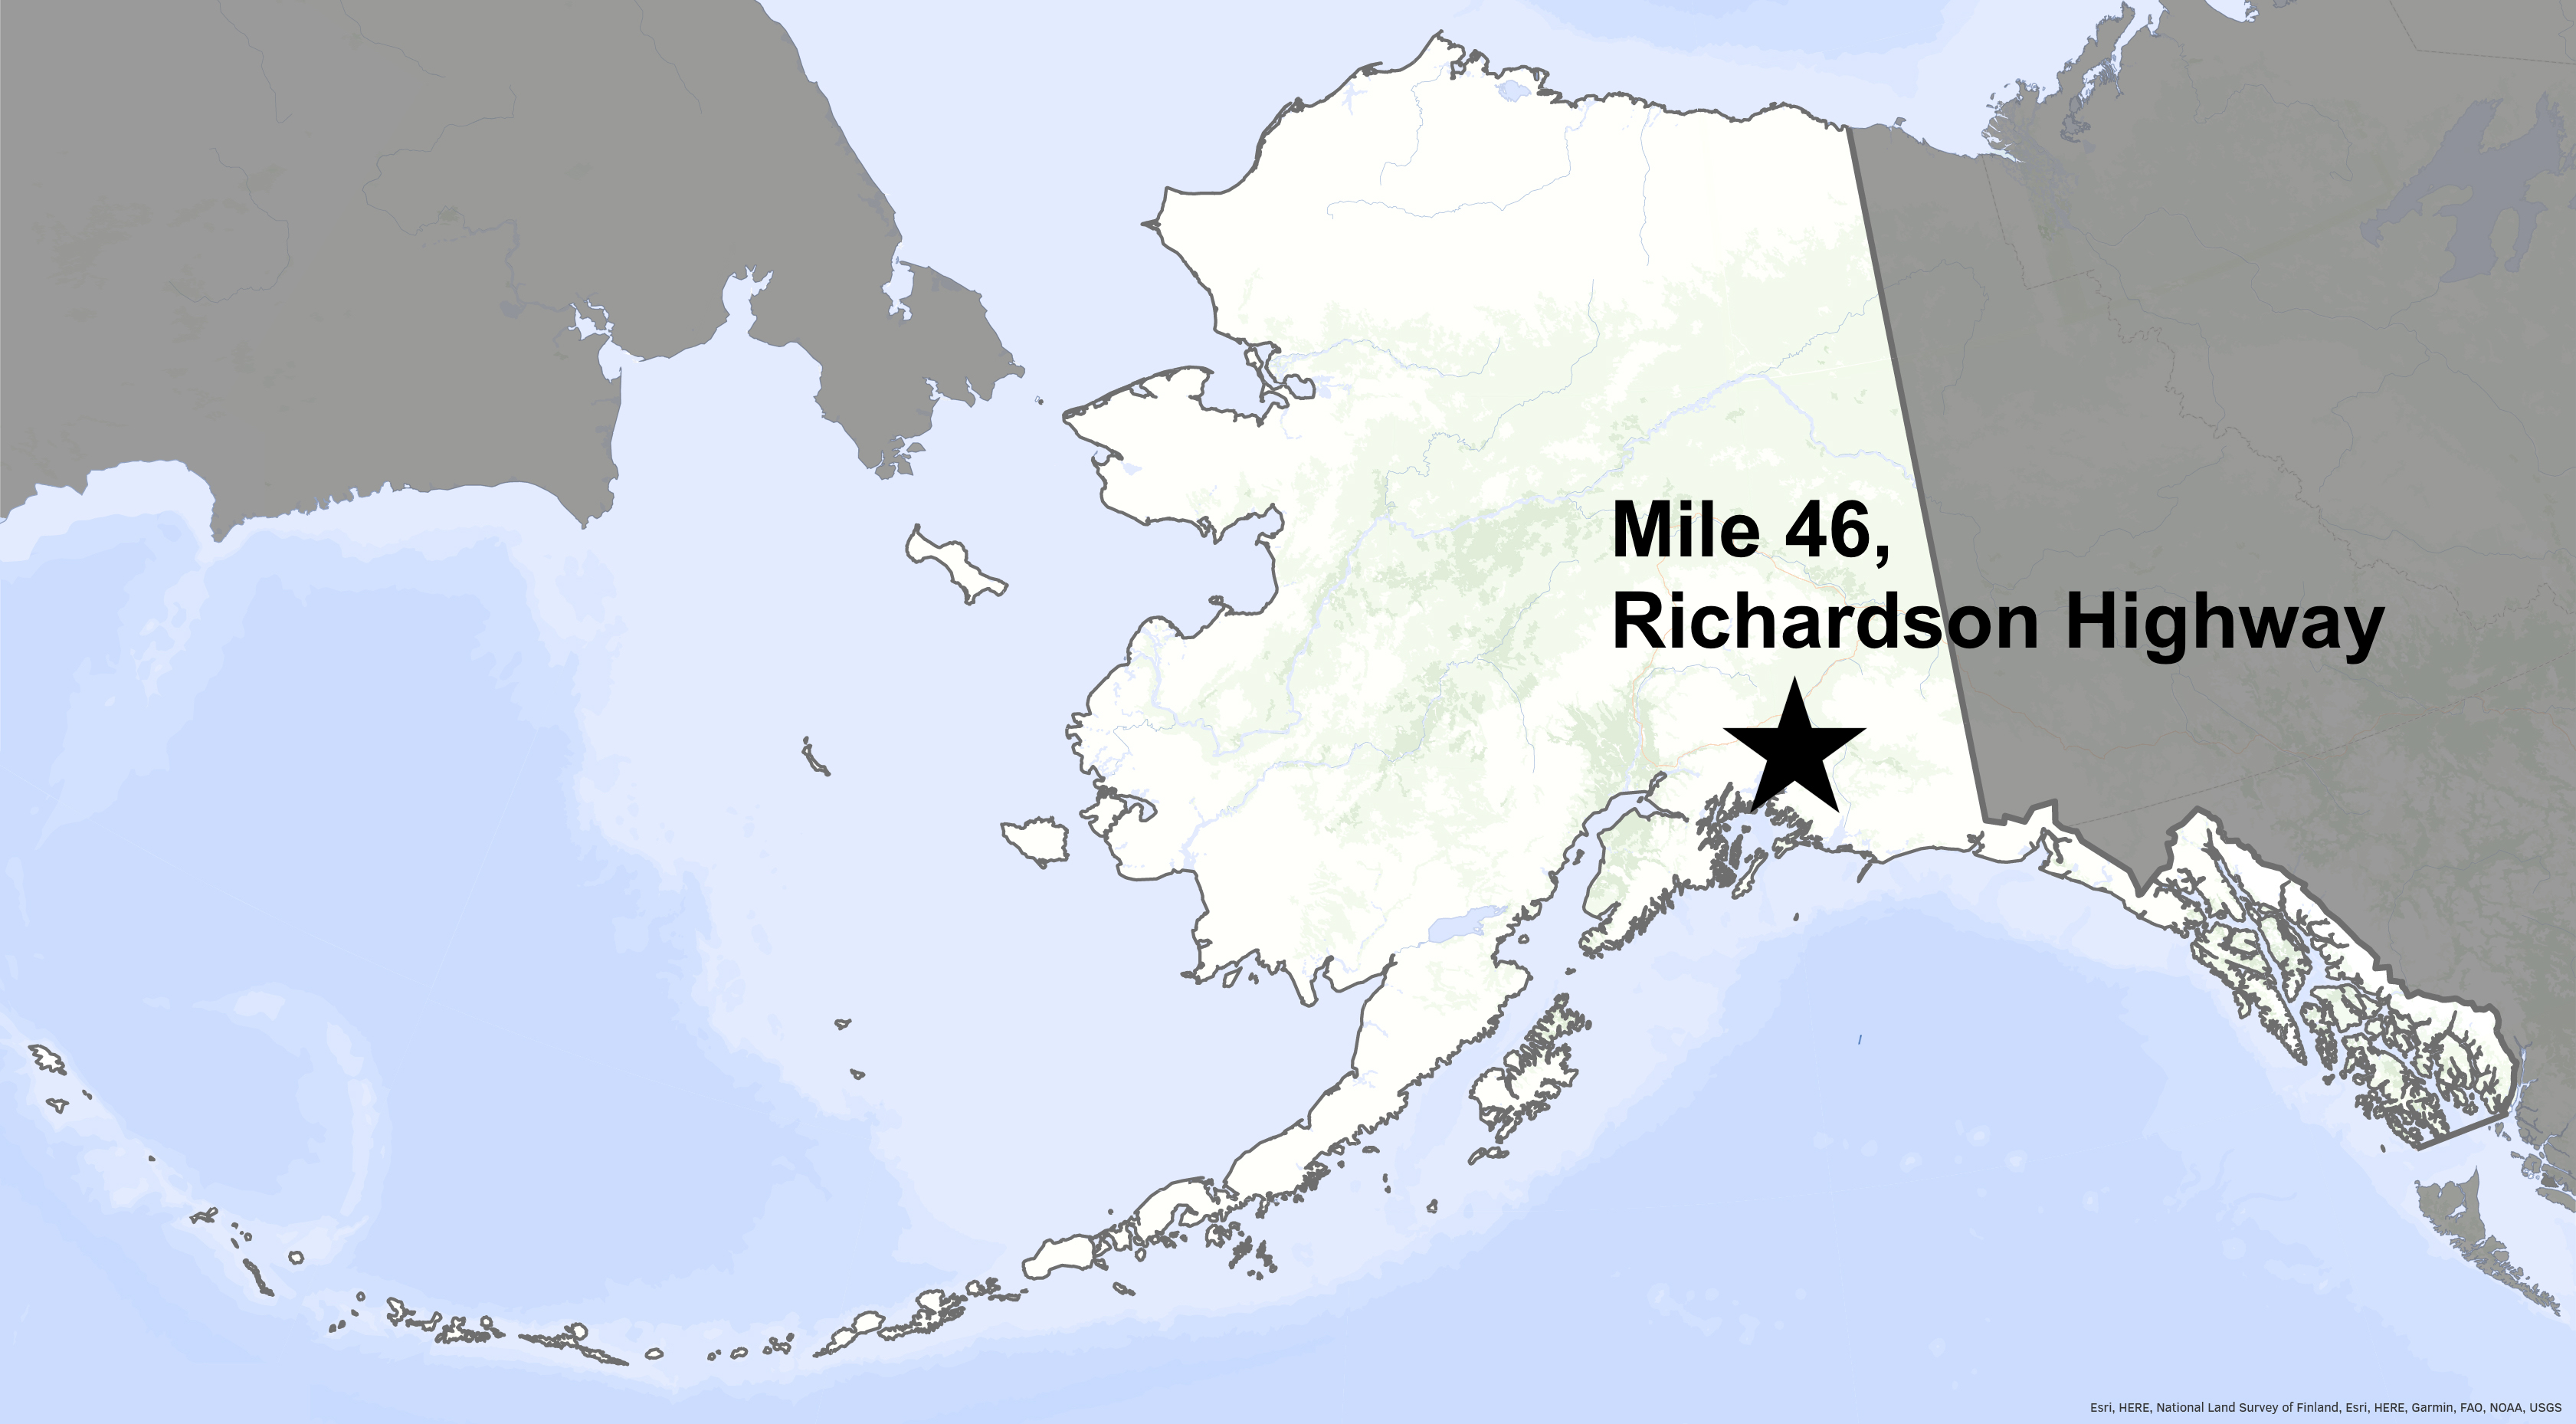 A map of 91视频 with a star in the lower southeast corner to mark mile 46 of the Richardson Highway